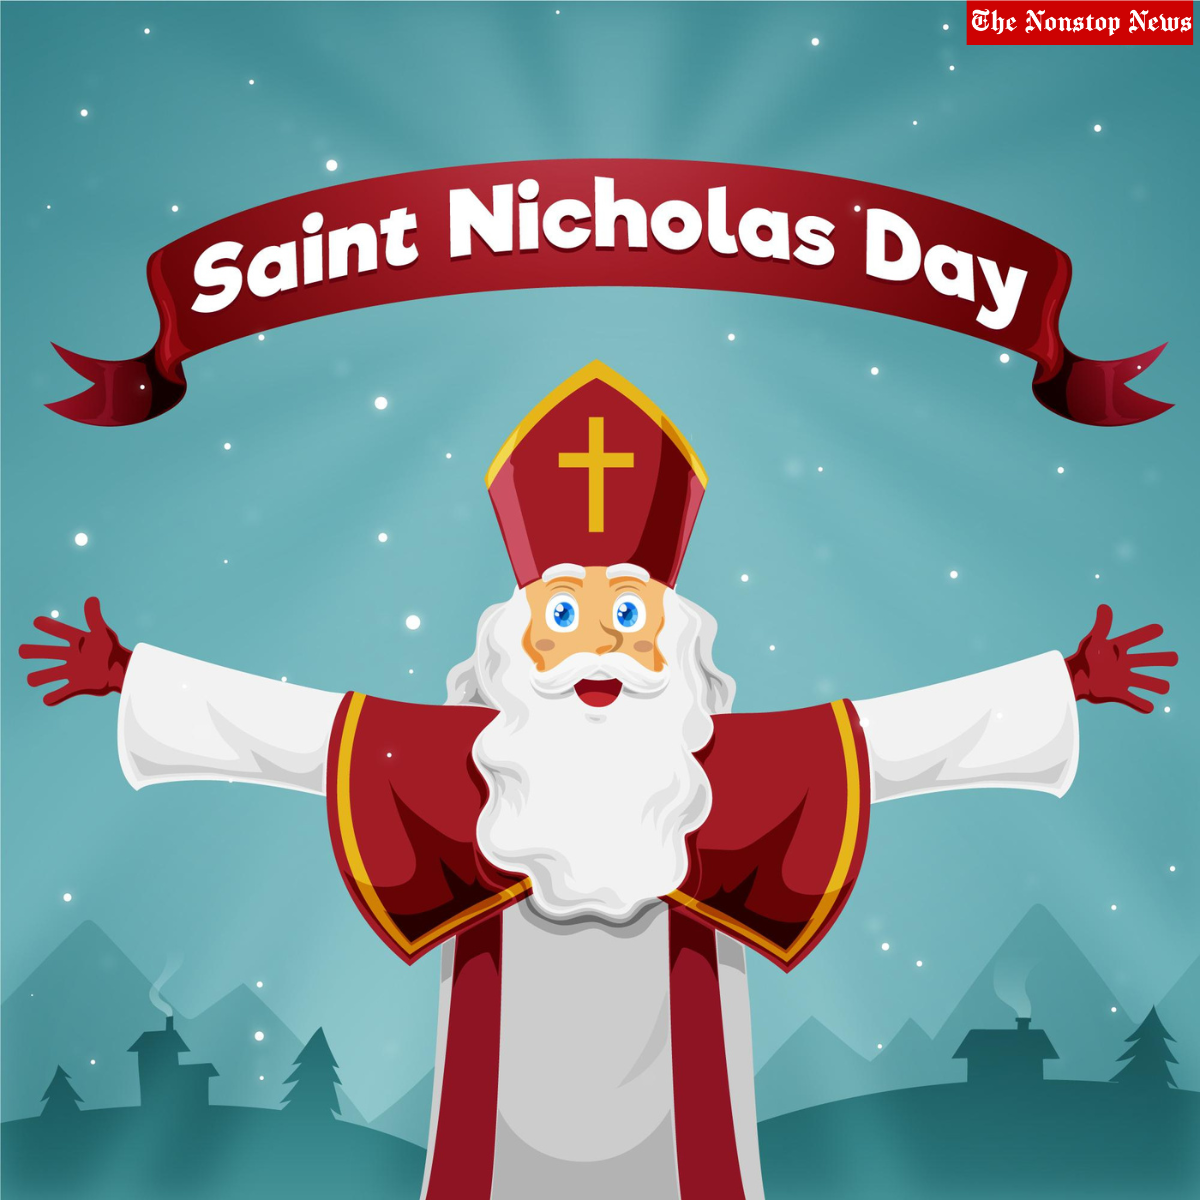 Happy St Nicholas Day 2022: Cliparts, Memes, Wishes, Messages, Quotes, Captions, Sayings, HD Images, and Greetings